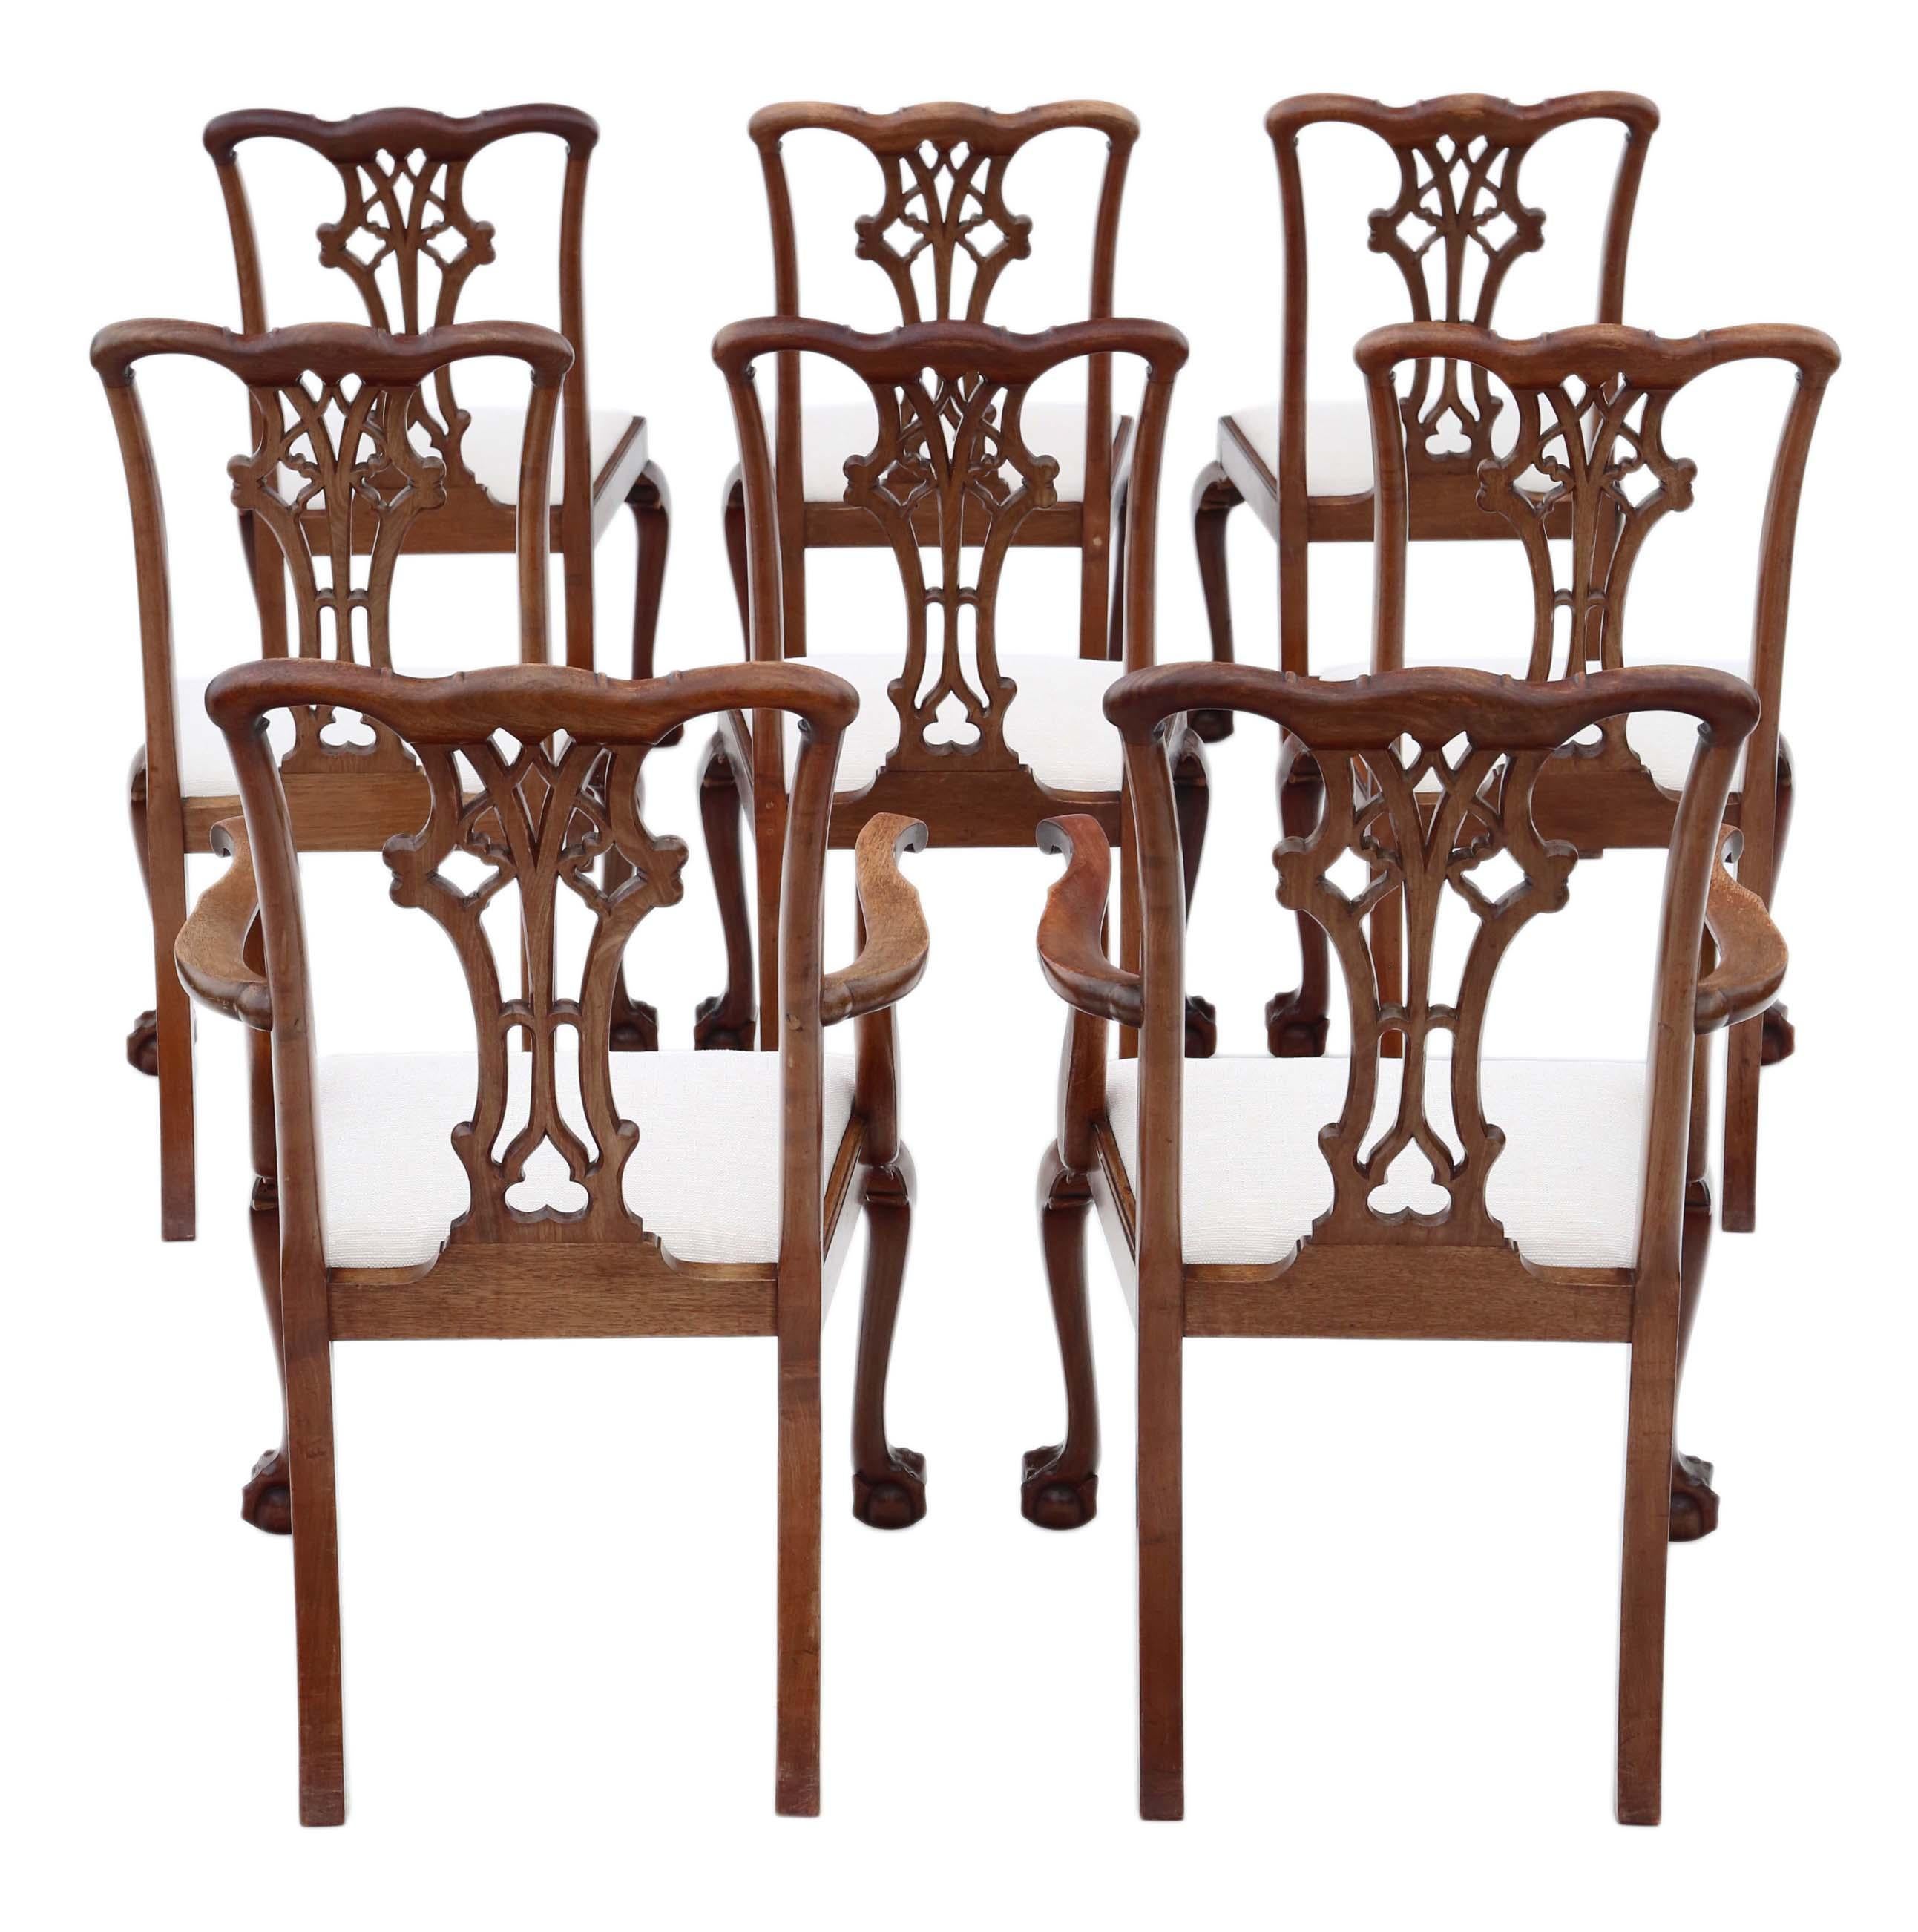 Antique quality set of 8 (6+2) mahogany dining chairs Georgian revival, circa 1910.

Solid with no loose joints. Lovely elegant design. No woodworm.

Lovely carved backs, the cabriole legs have desirable ball and claw feet.

Drop in seats,